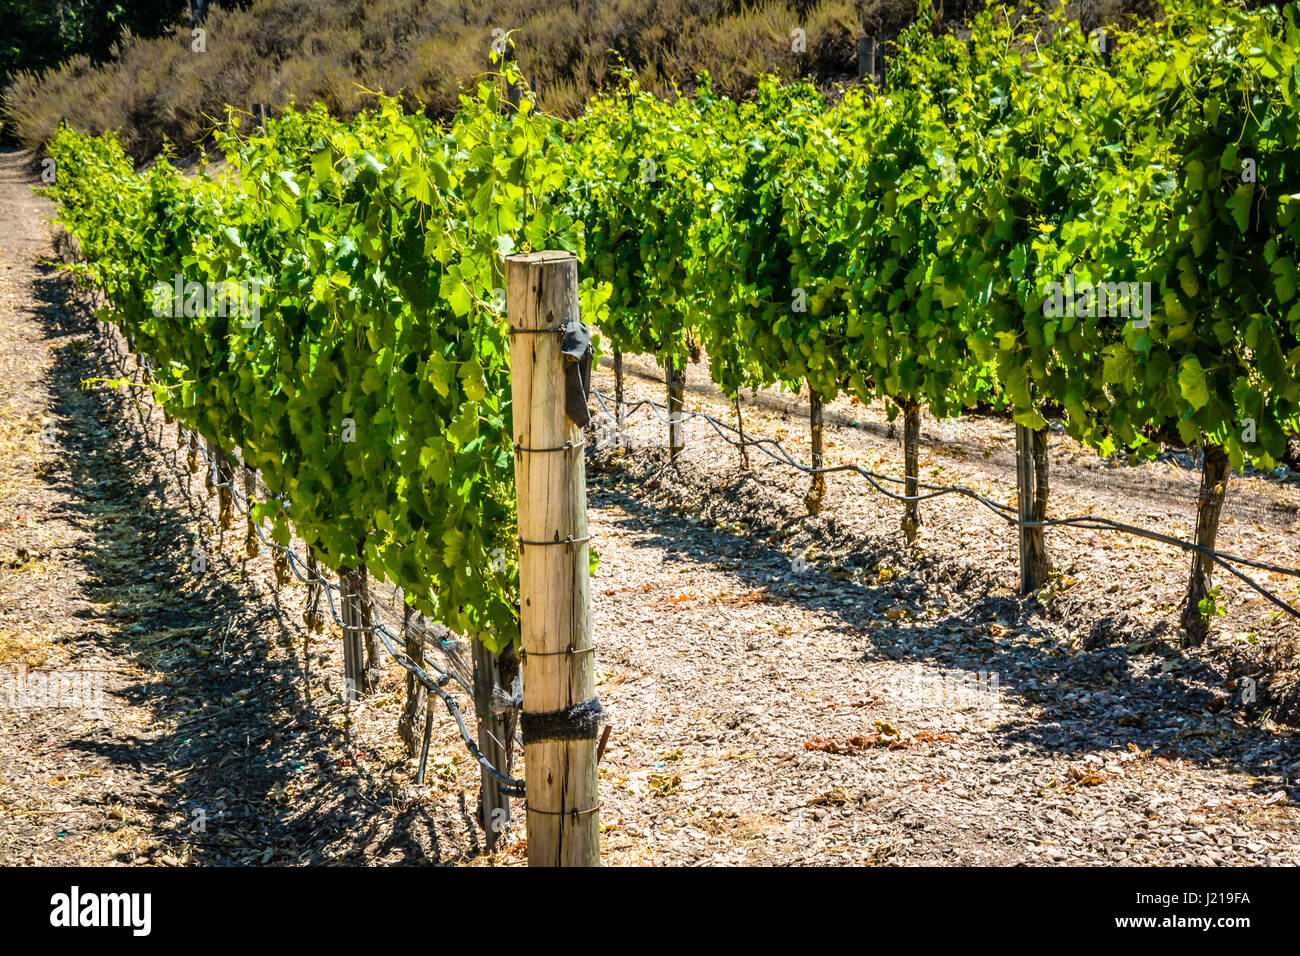 trellises of grapevines trail along the rows of a vineyard amongst J219FA